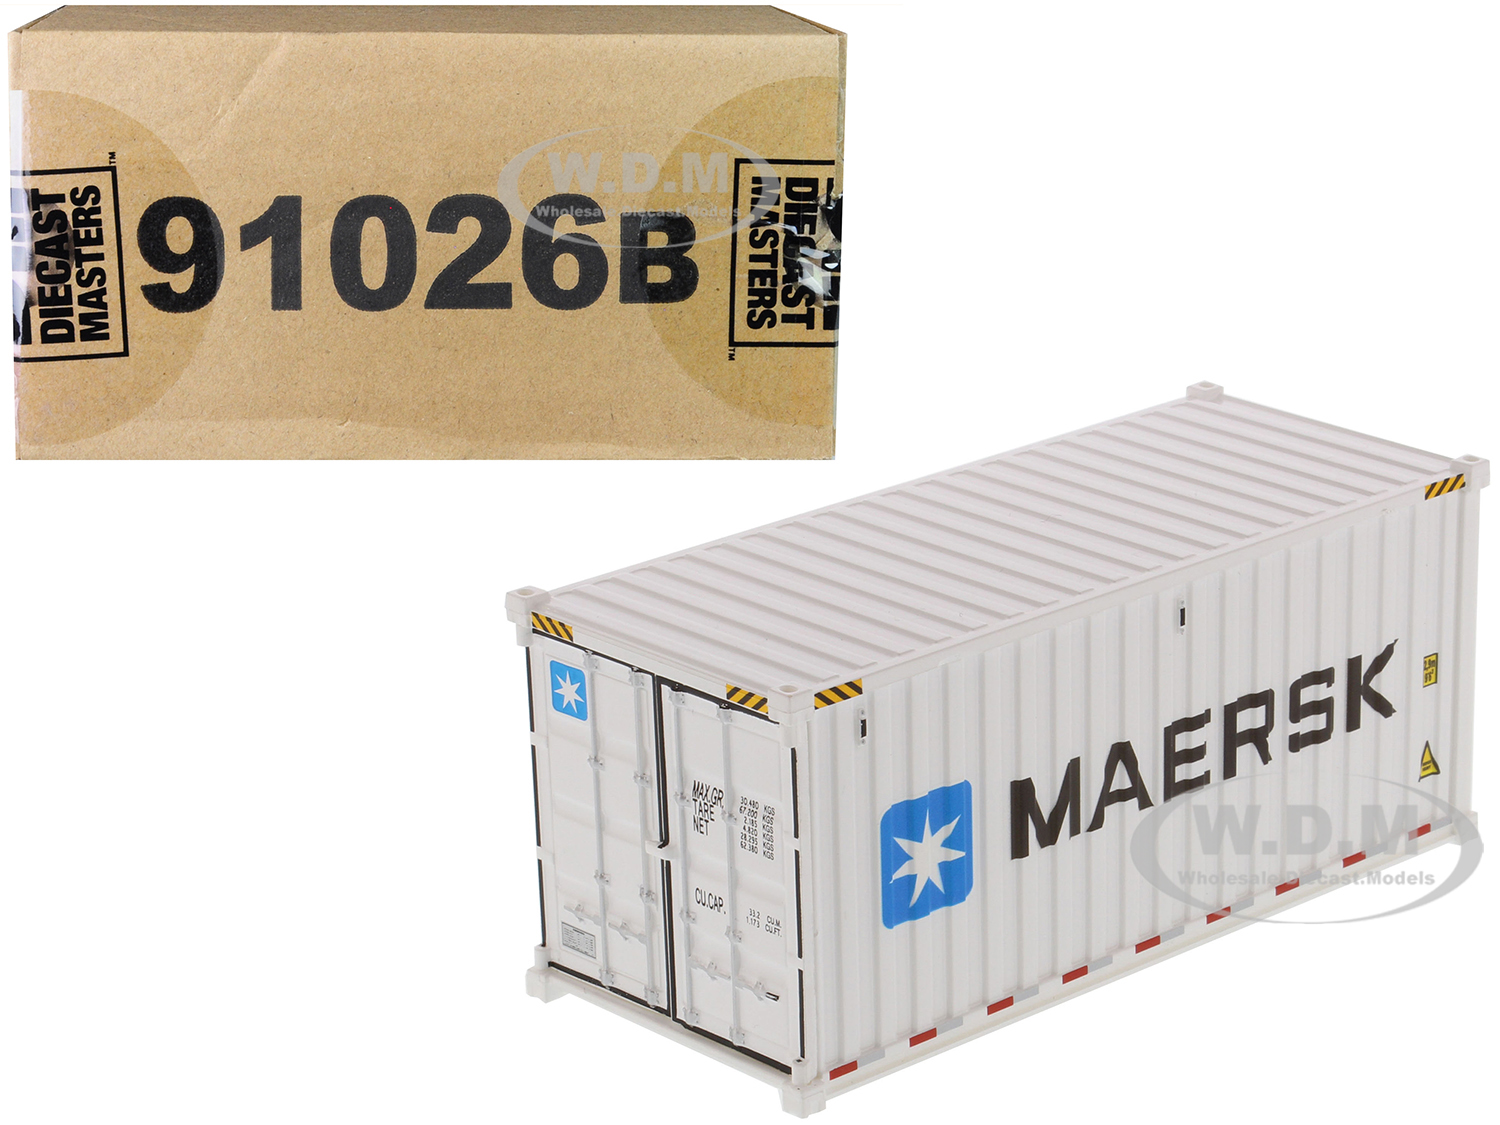 20 Refrigerated Sea Container "maersk" White "transport Series" 1/50 Model By Diecast Masters